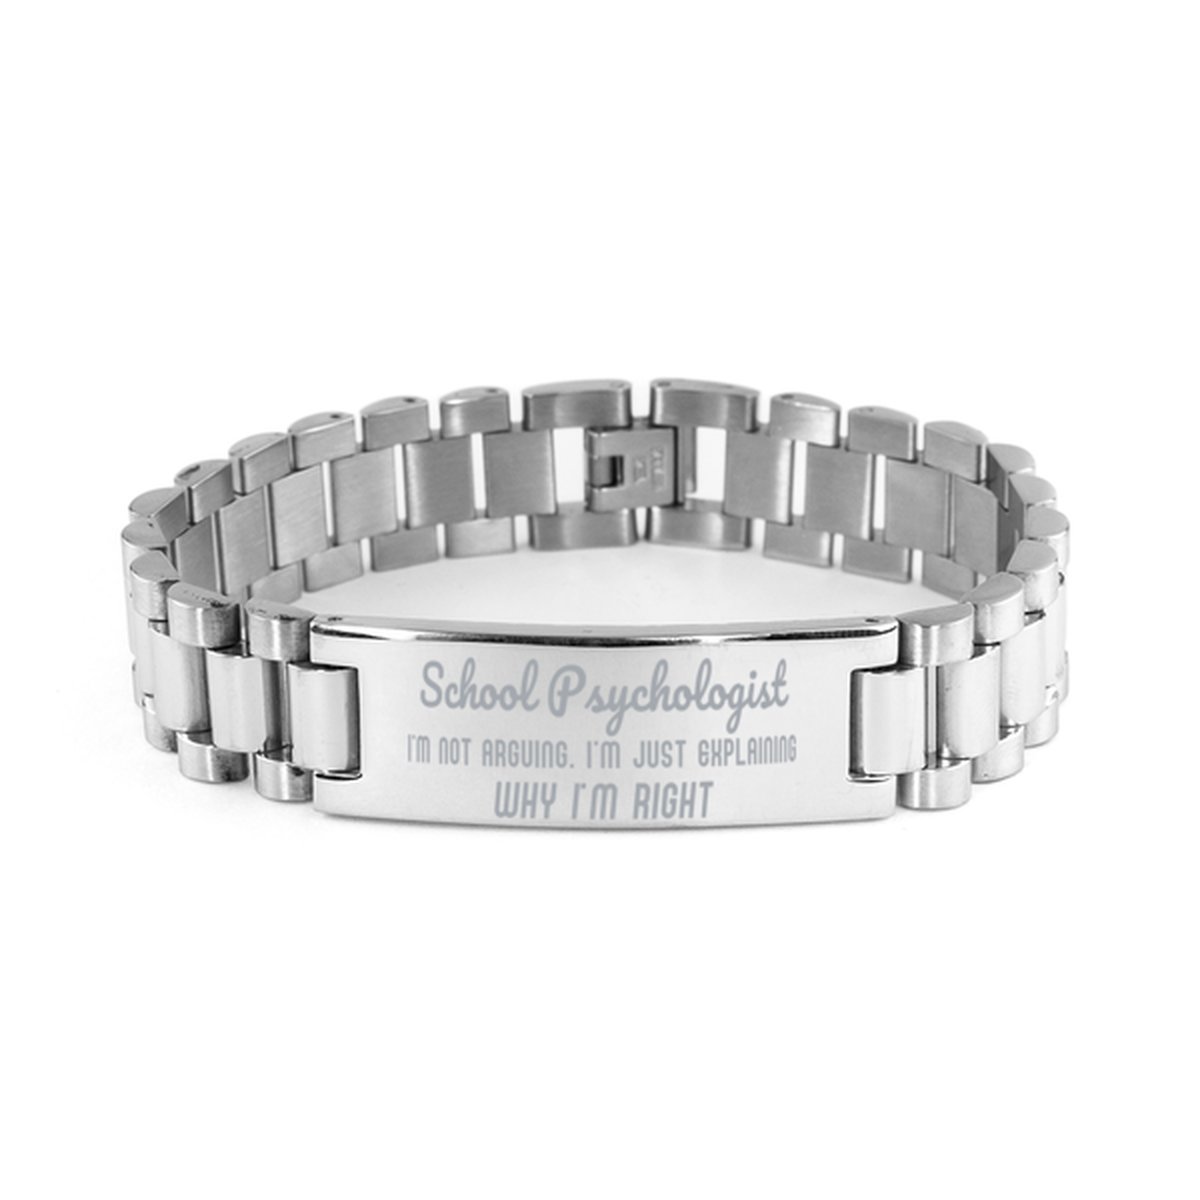 School Psychologist I'm not Arguing. I'm Just Explaining Why I'm RIGHT Ladder Stainless Steel Bracelet, Graduation Birthday Christmas School Psychologist Gifts For School Psychologist Funny Saying Quote Present for Men Women Coworker